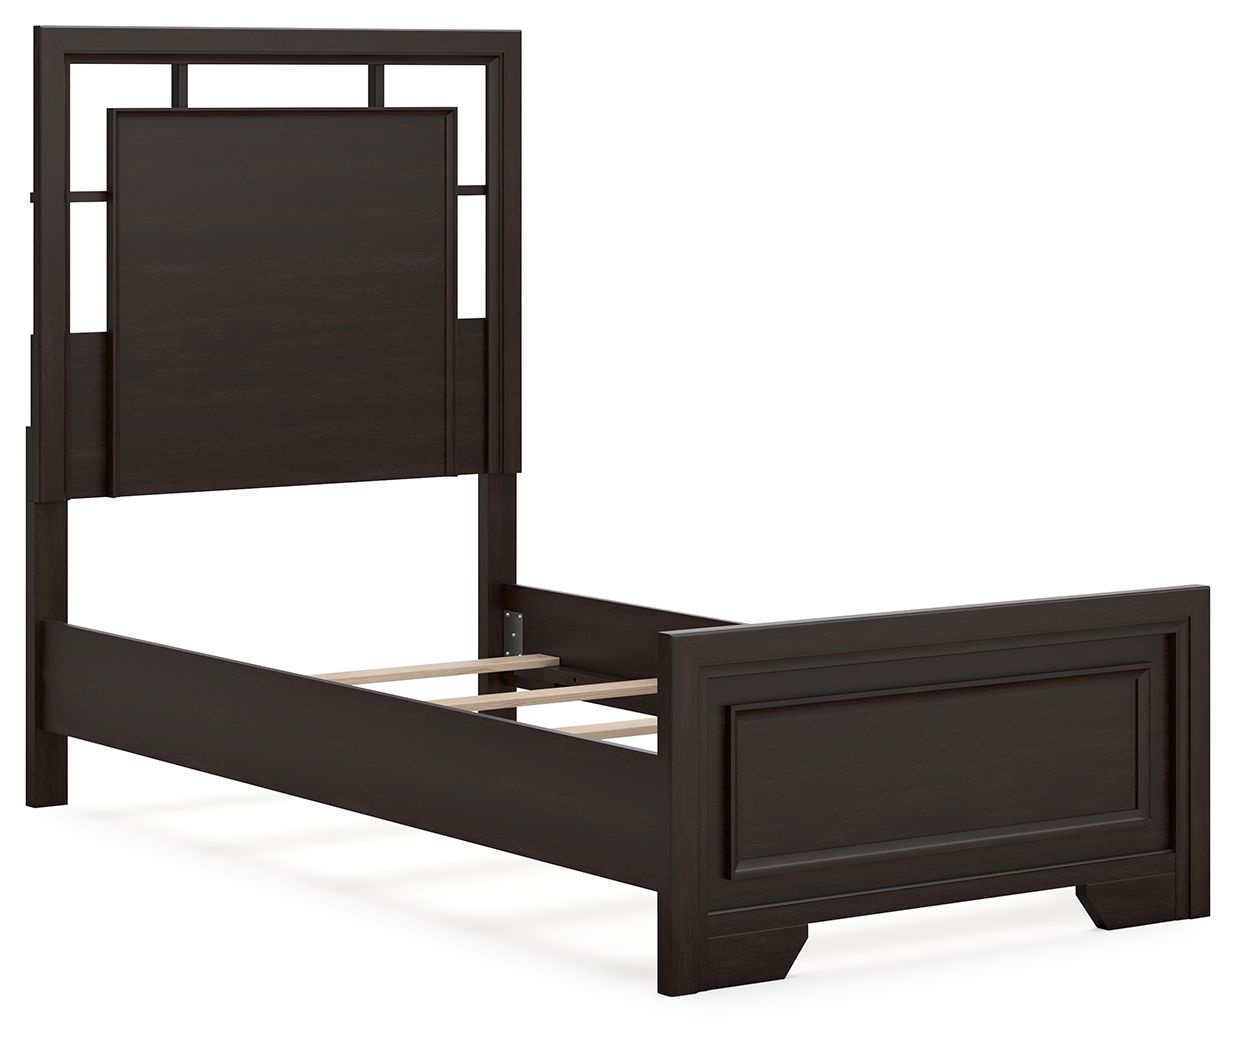 Covetown - Panel Bed - Tony's Home Furnishings